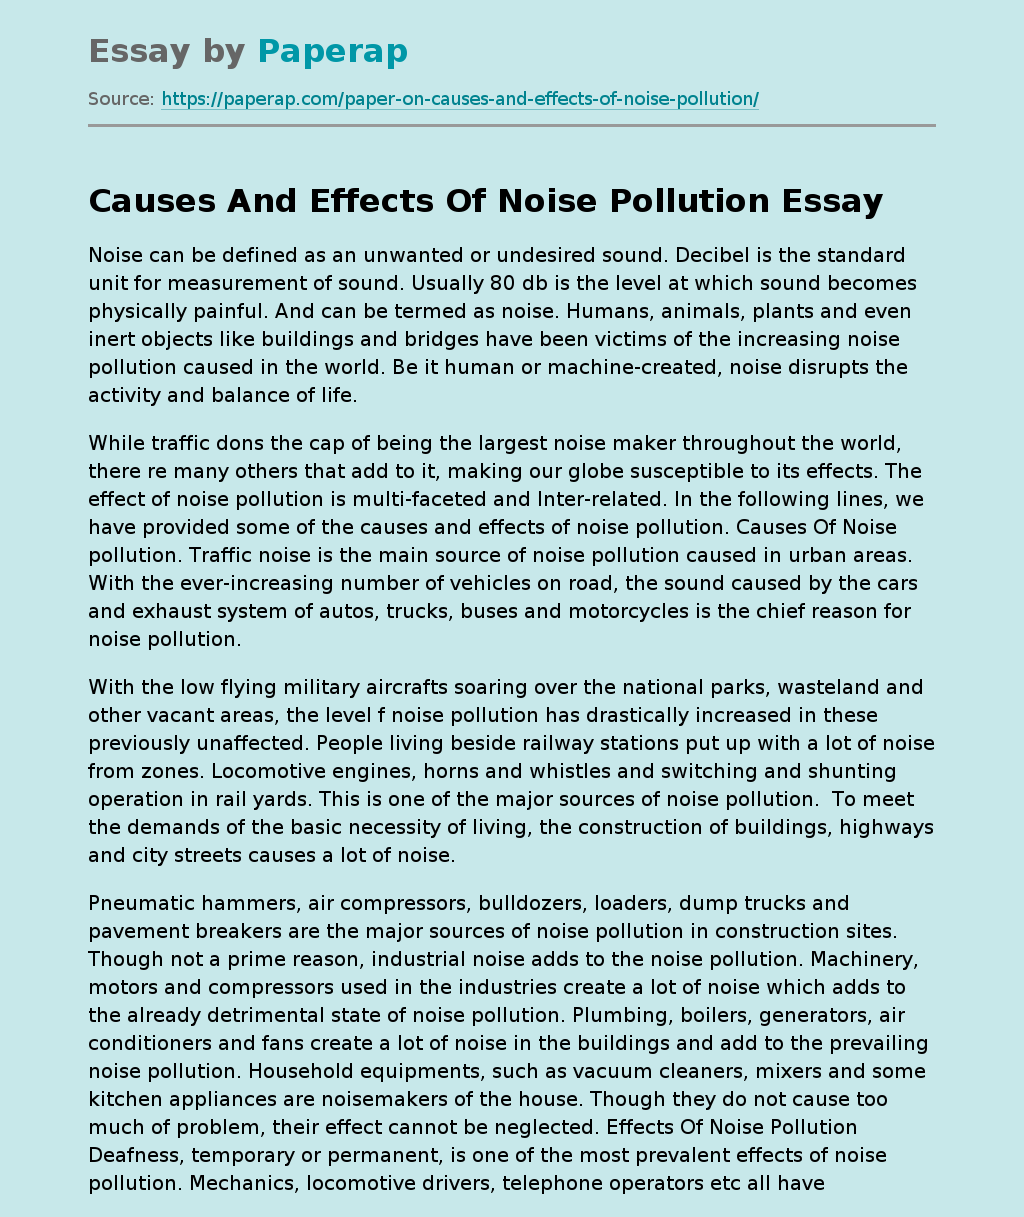 Causes And Effects Of Noise Pollution